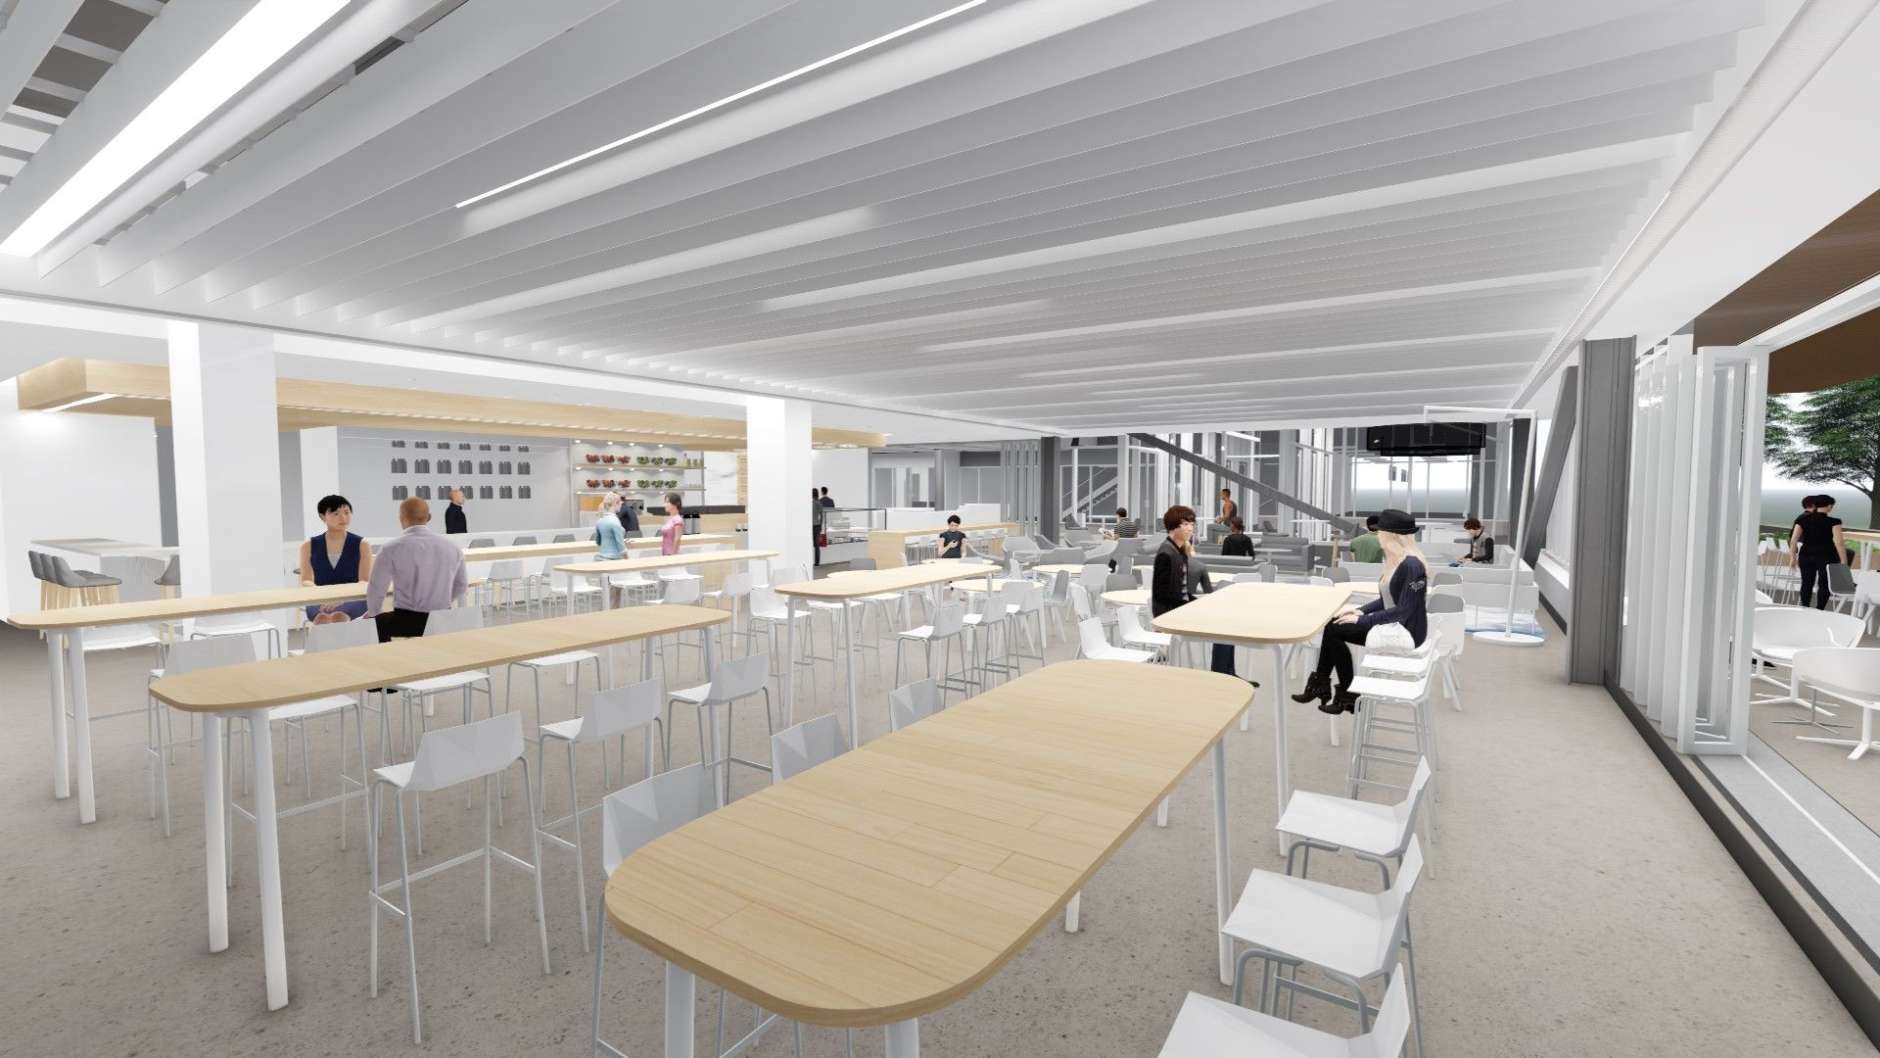 Mendelsohn, whose restaurants include Good Stuff Eatery, We, The Pizza and Santa Rosa Taqueria, is developing a menu for the St. James location that includes burgers, salads, gourmet pizzas and pastas. (Courtesy HKS Architects)